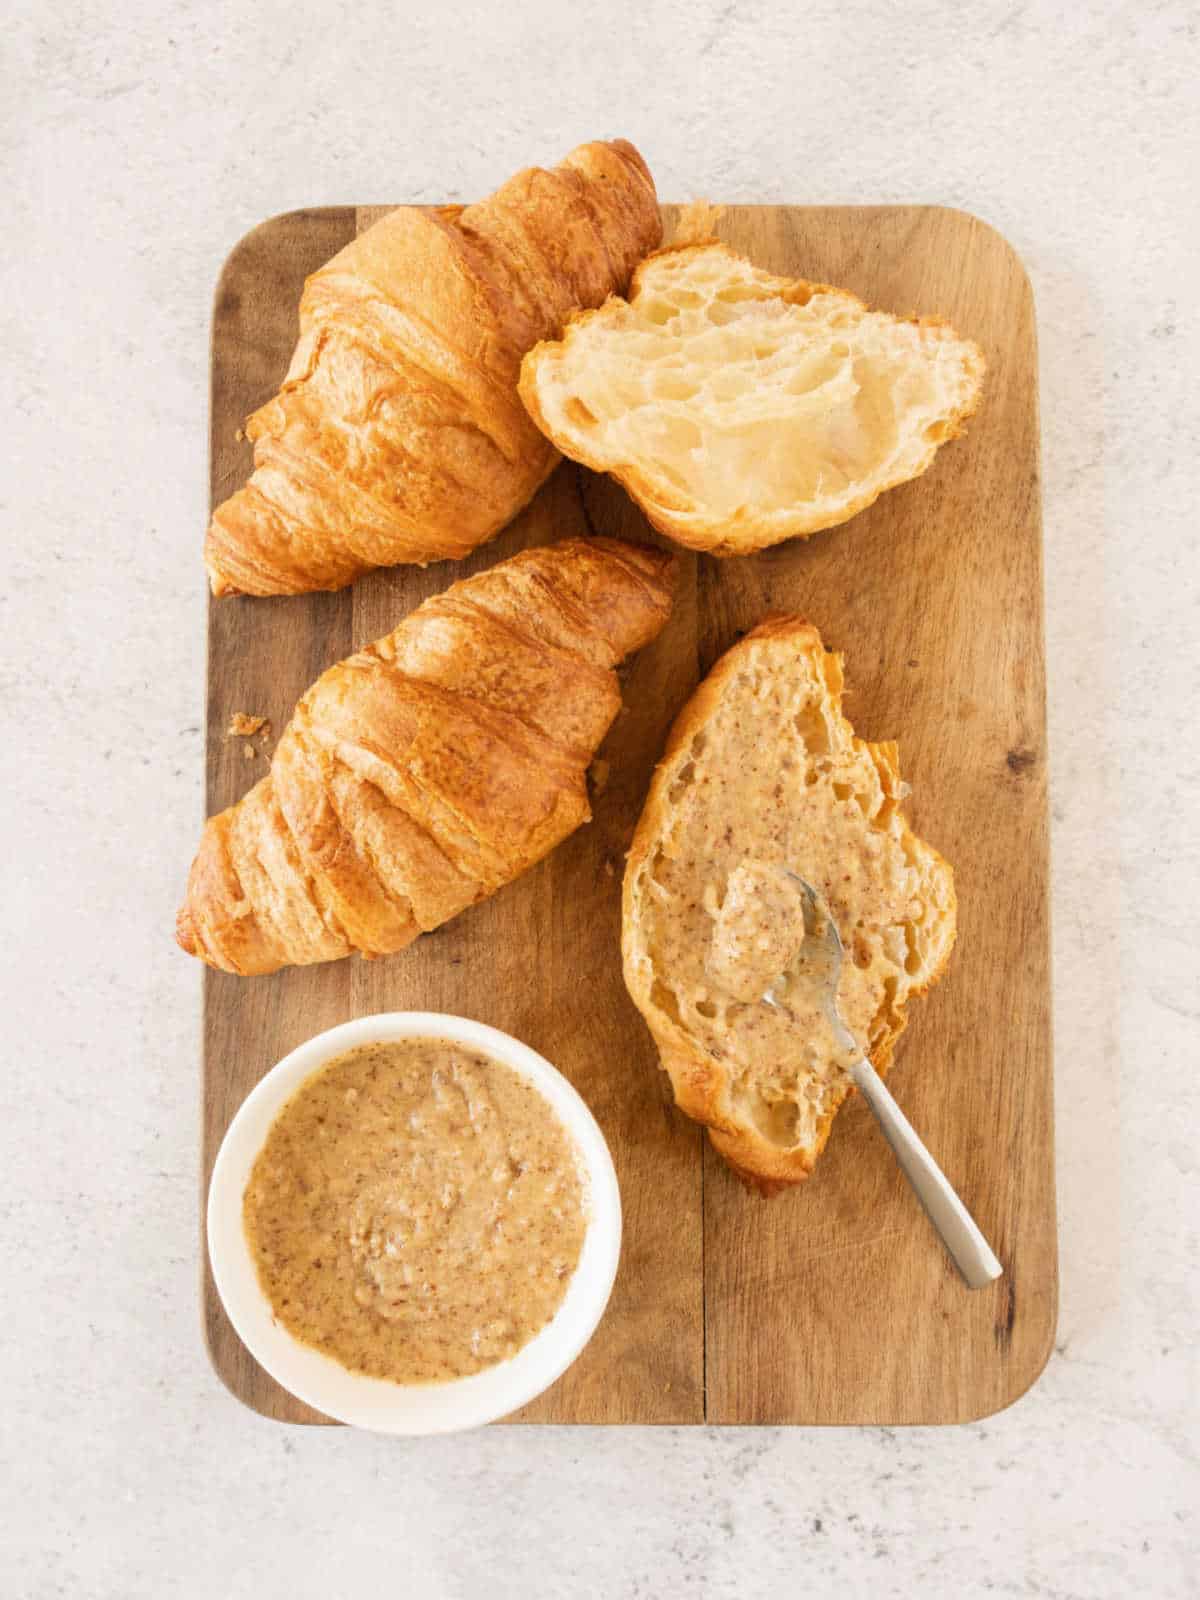 Spreading almond cream on a half croissant on a wooden board with whole croissants. Light gray surface.